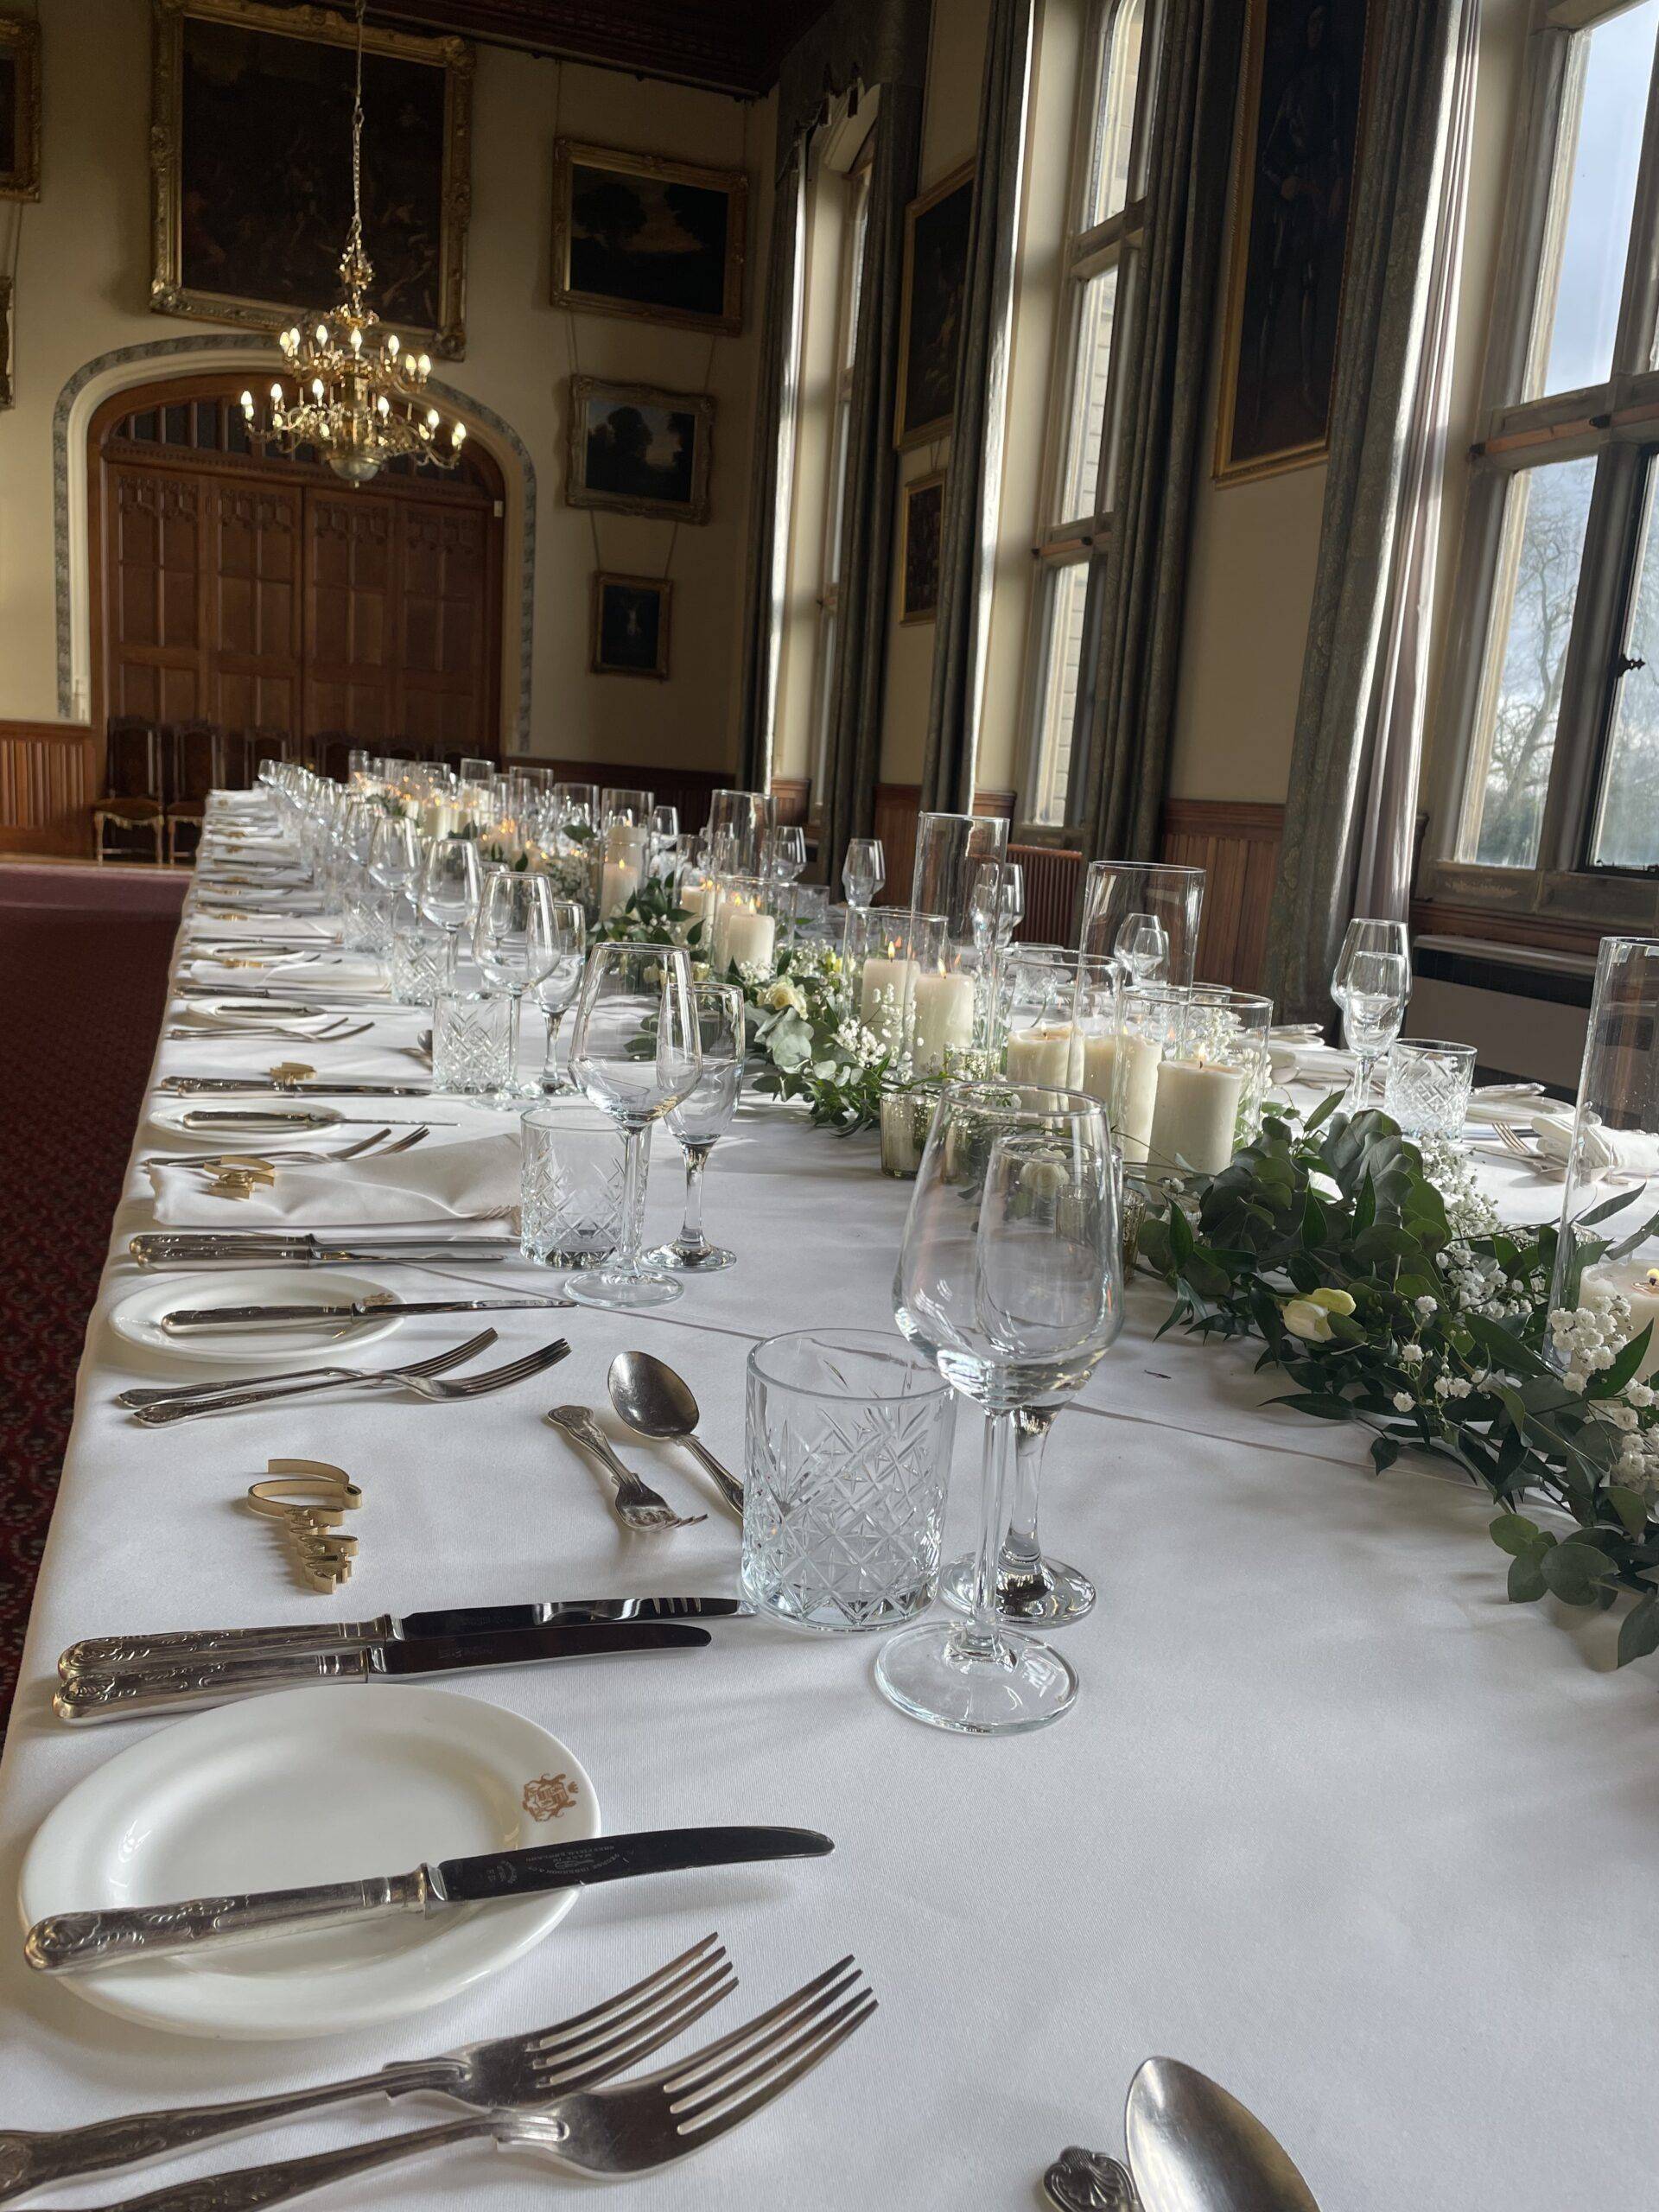 a long table is set with silverware and candles.